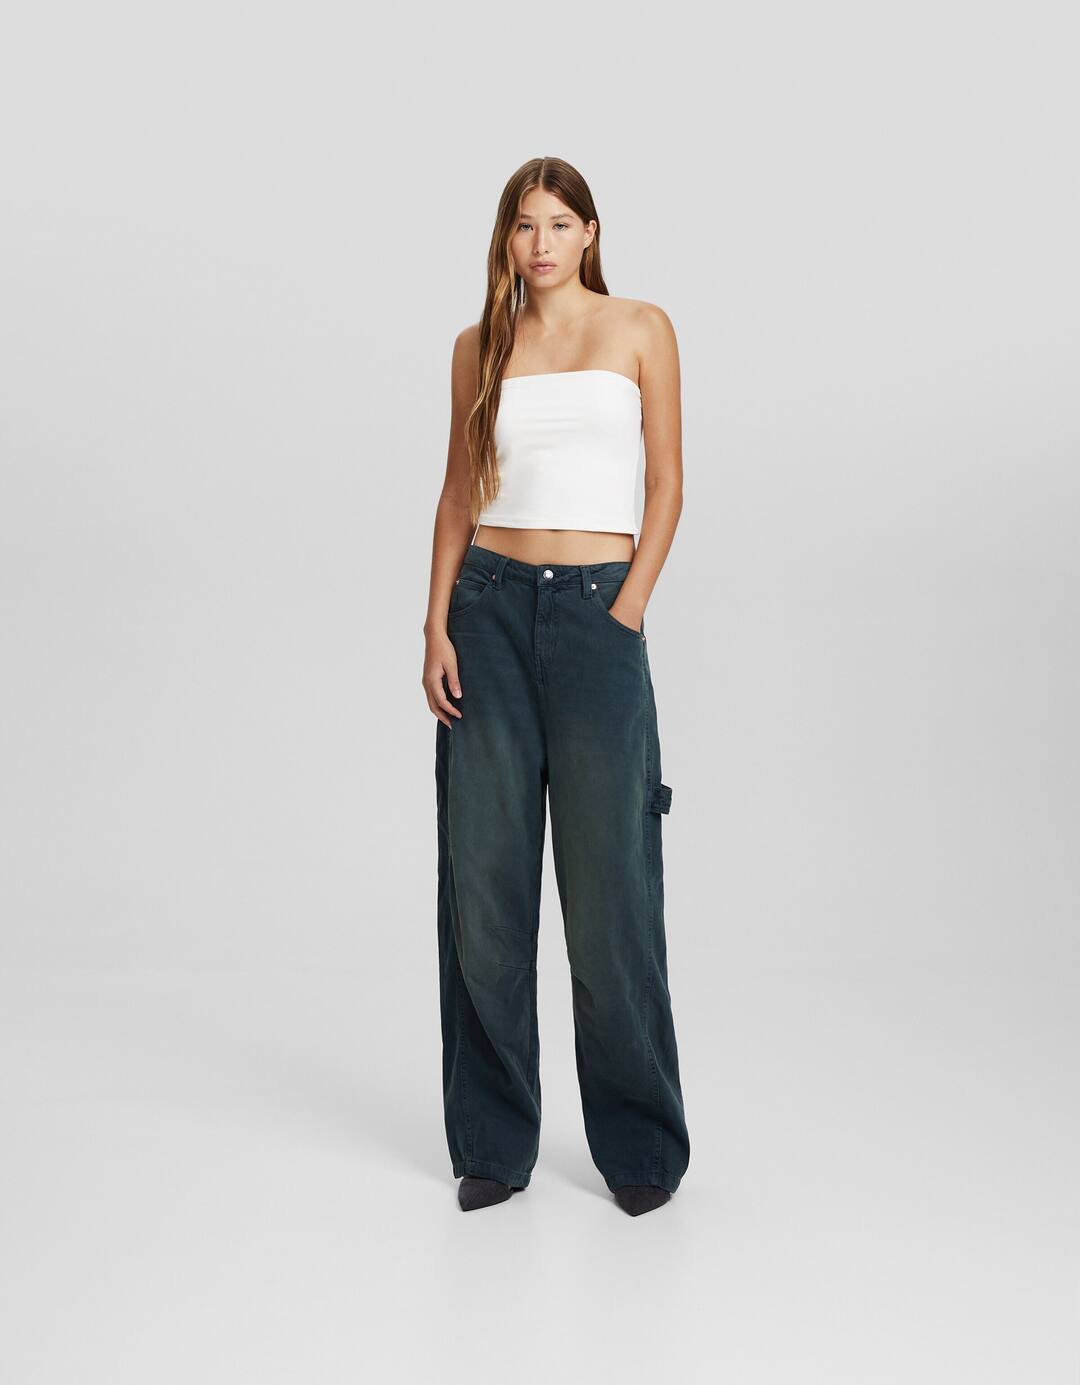 Skater fit trousers with carpenter detail